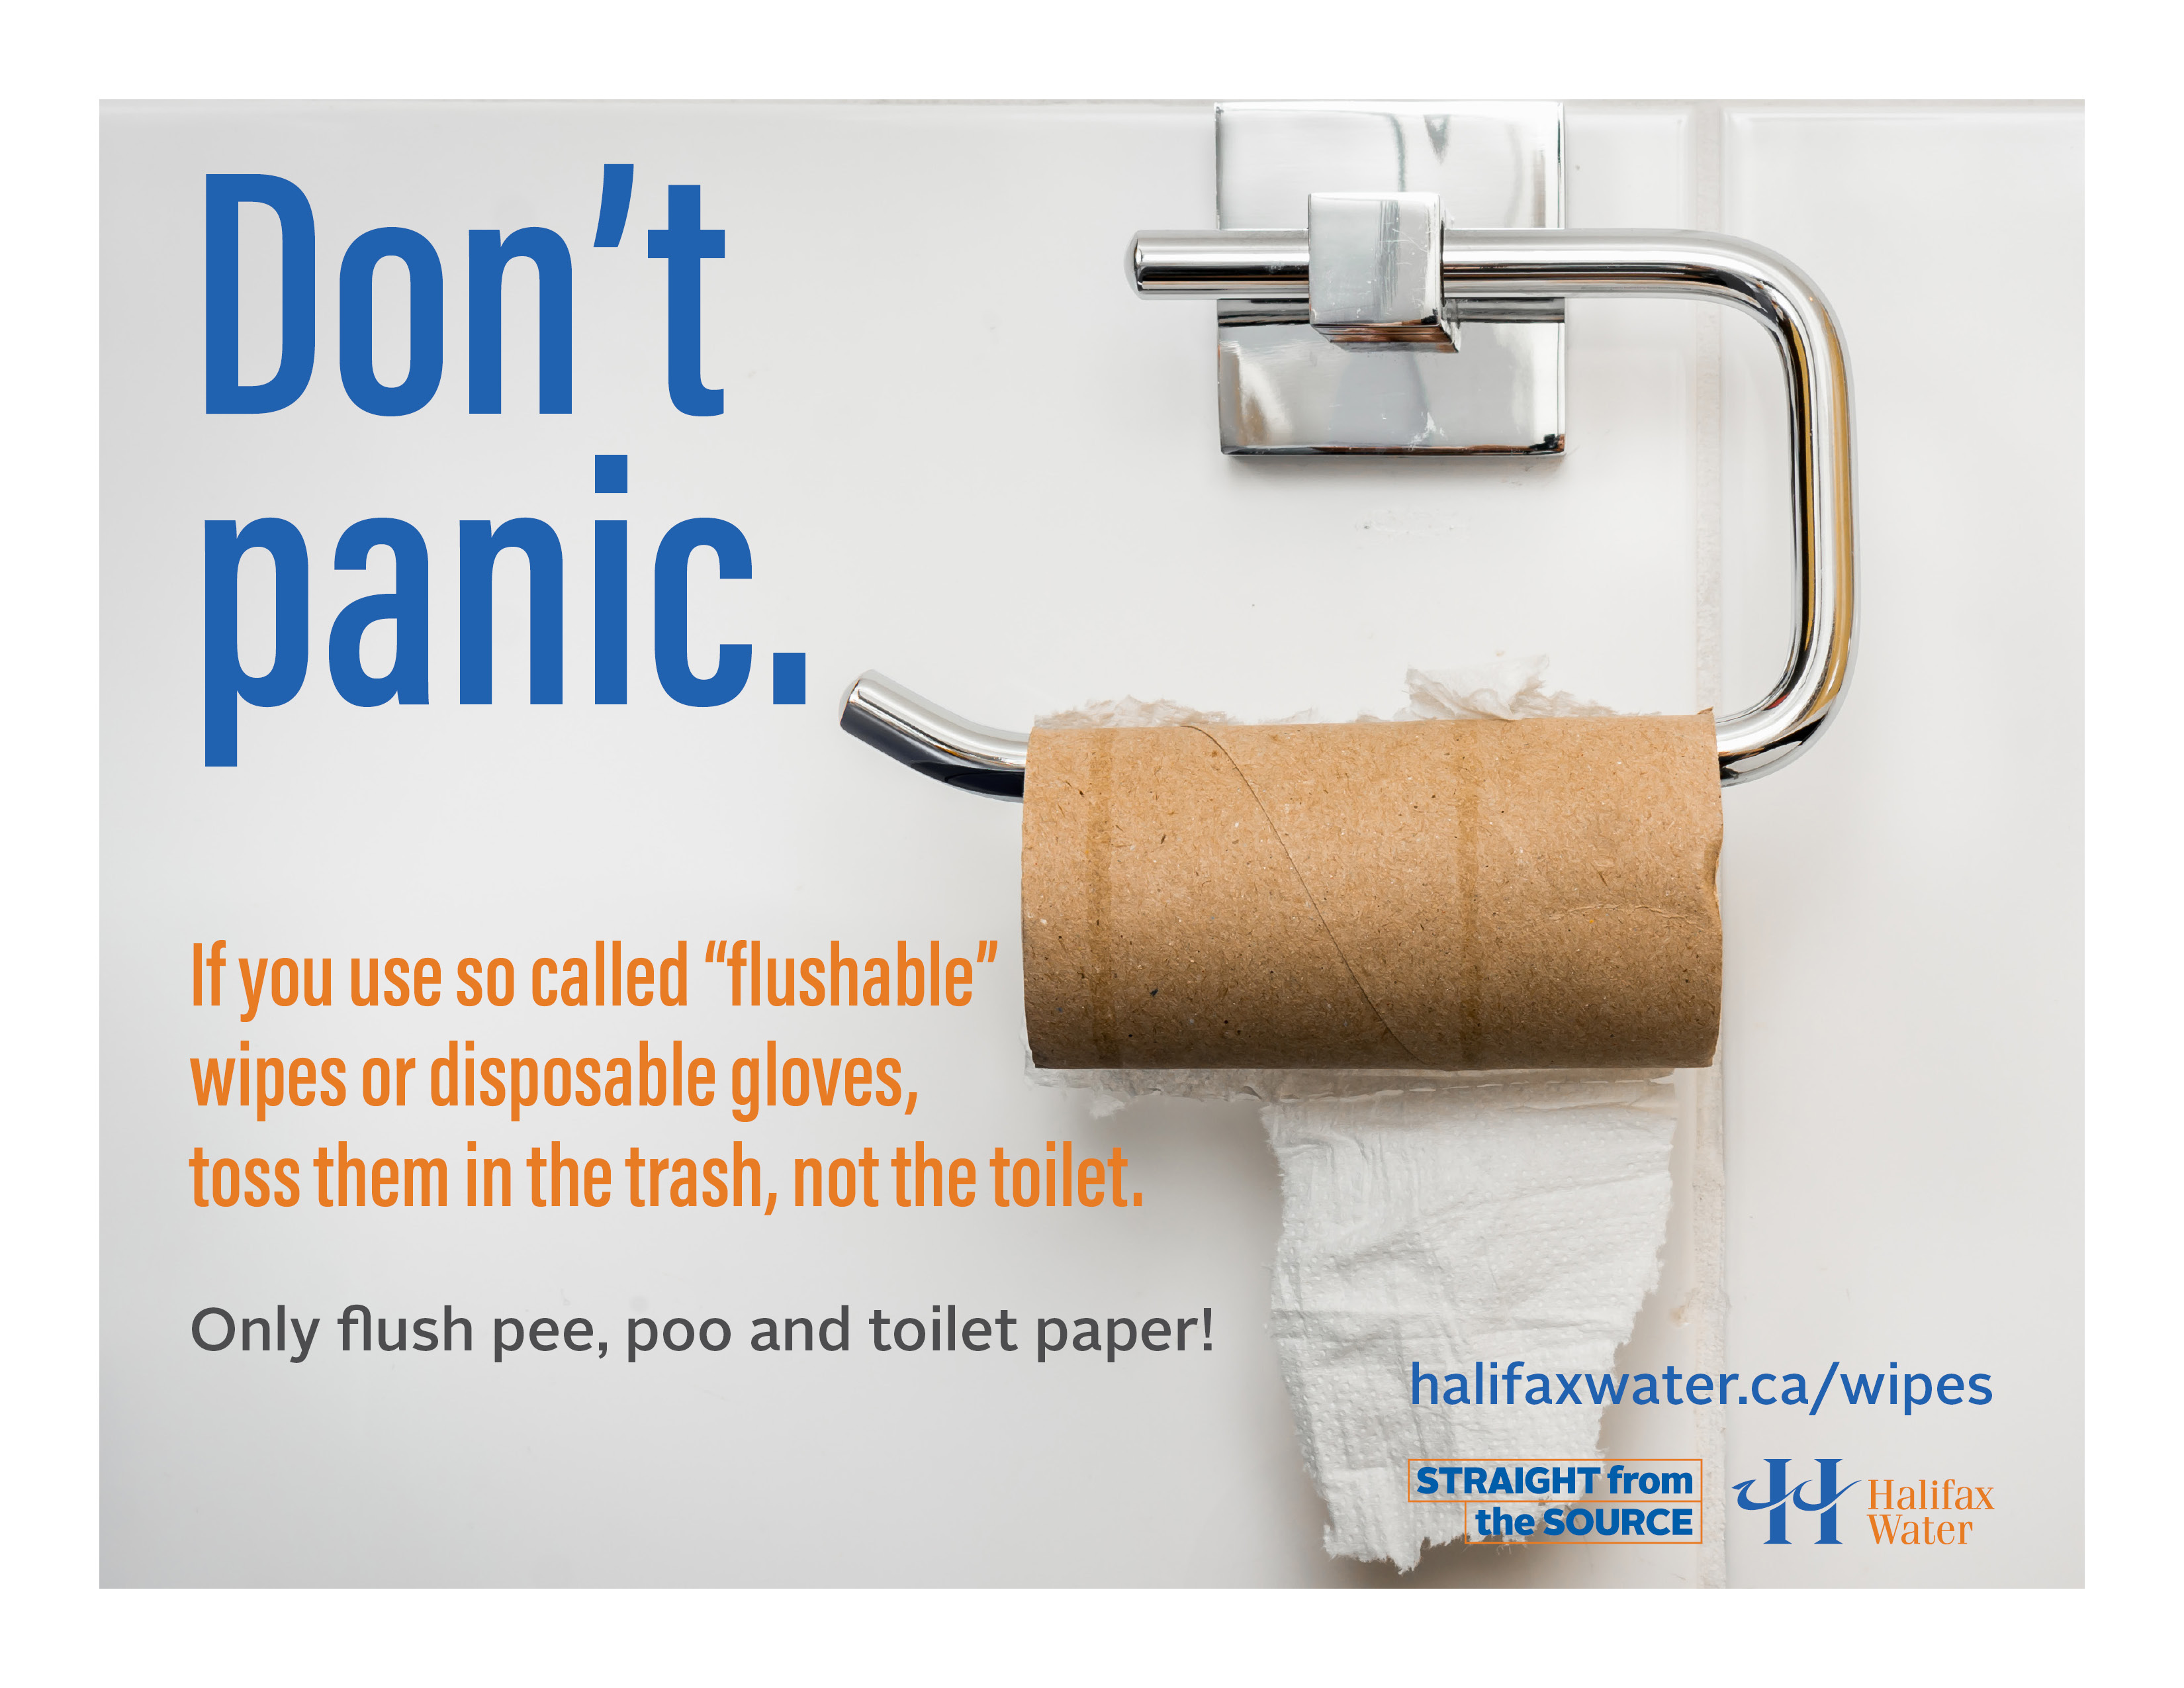 Don't Flush Wipes or Gloves - Posters - 8.5in x 11in - 5